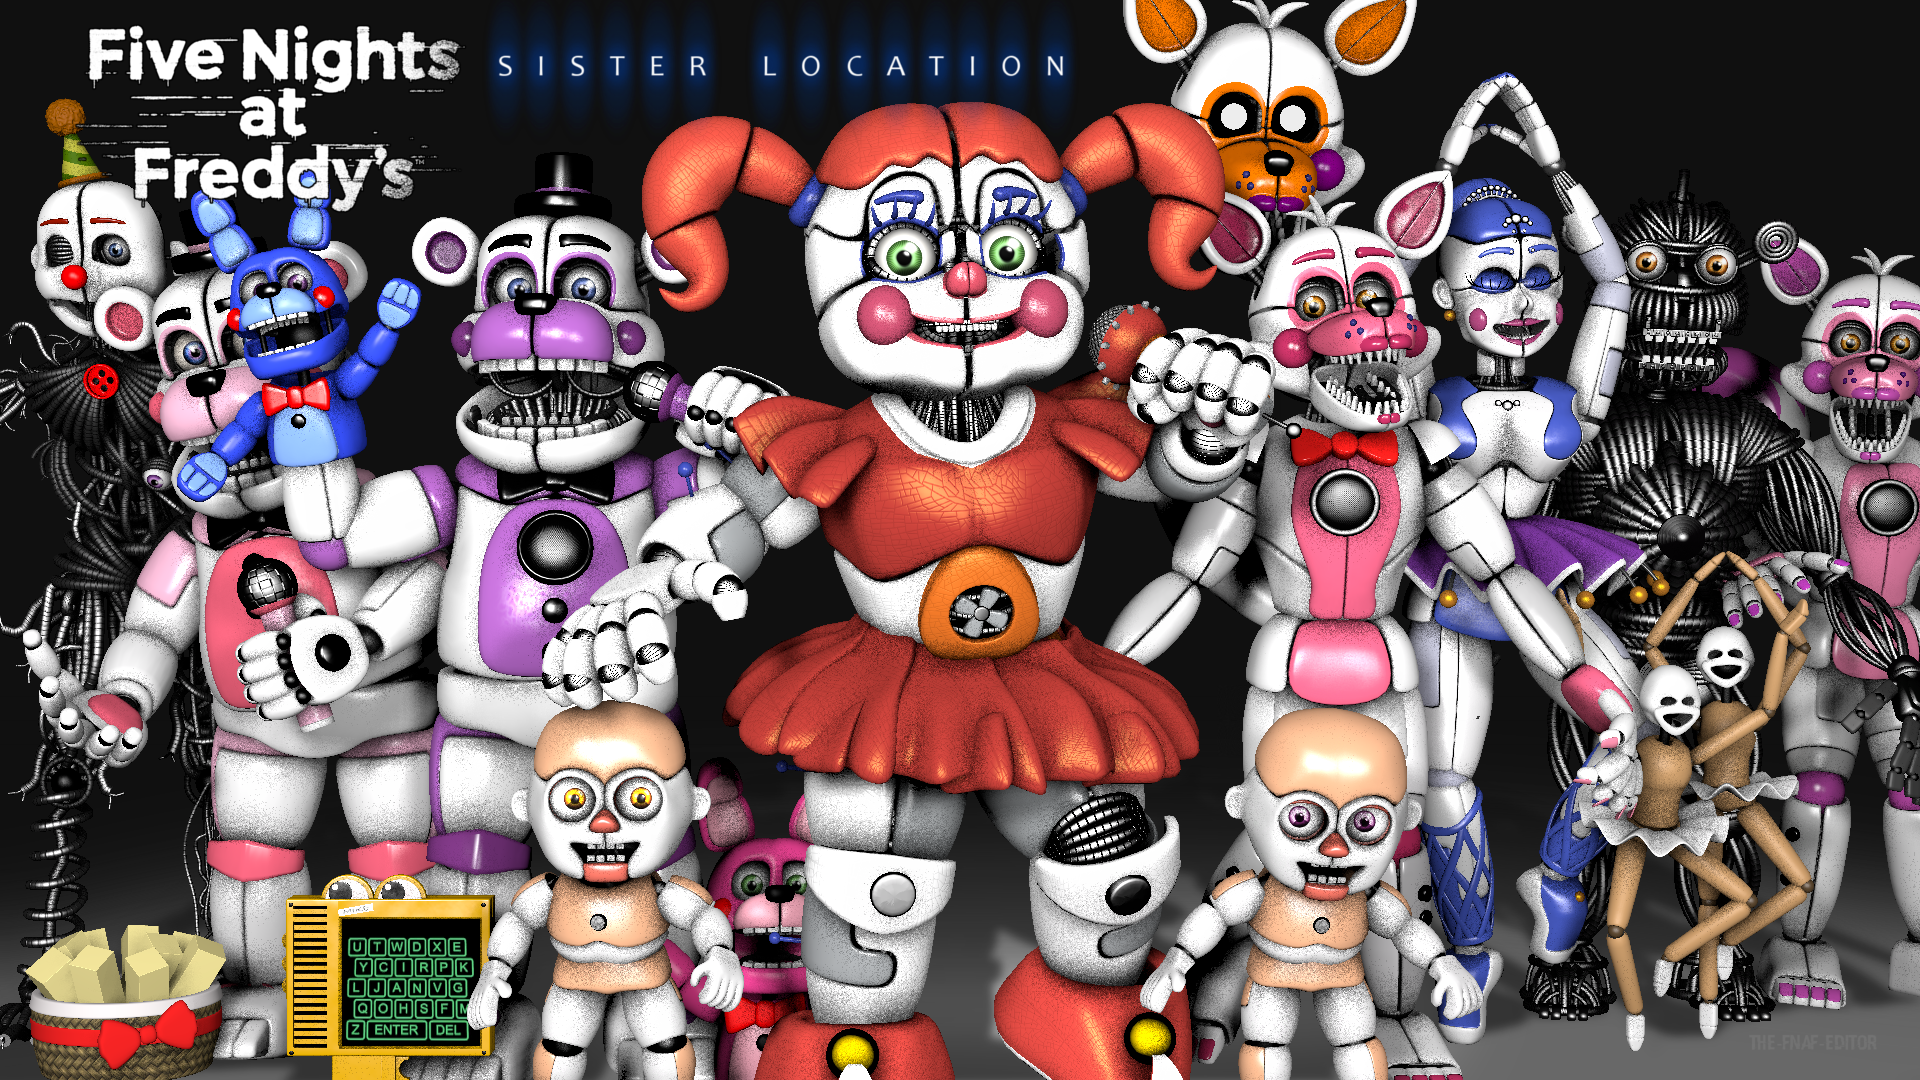 Five Nights at Freddy's: Sister Location Wallpaper Free